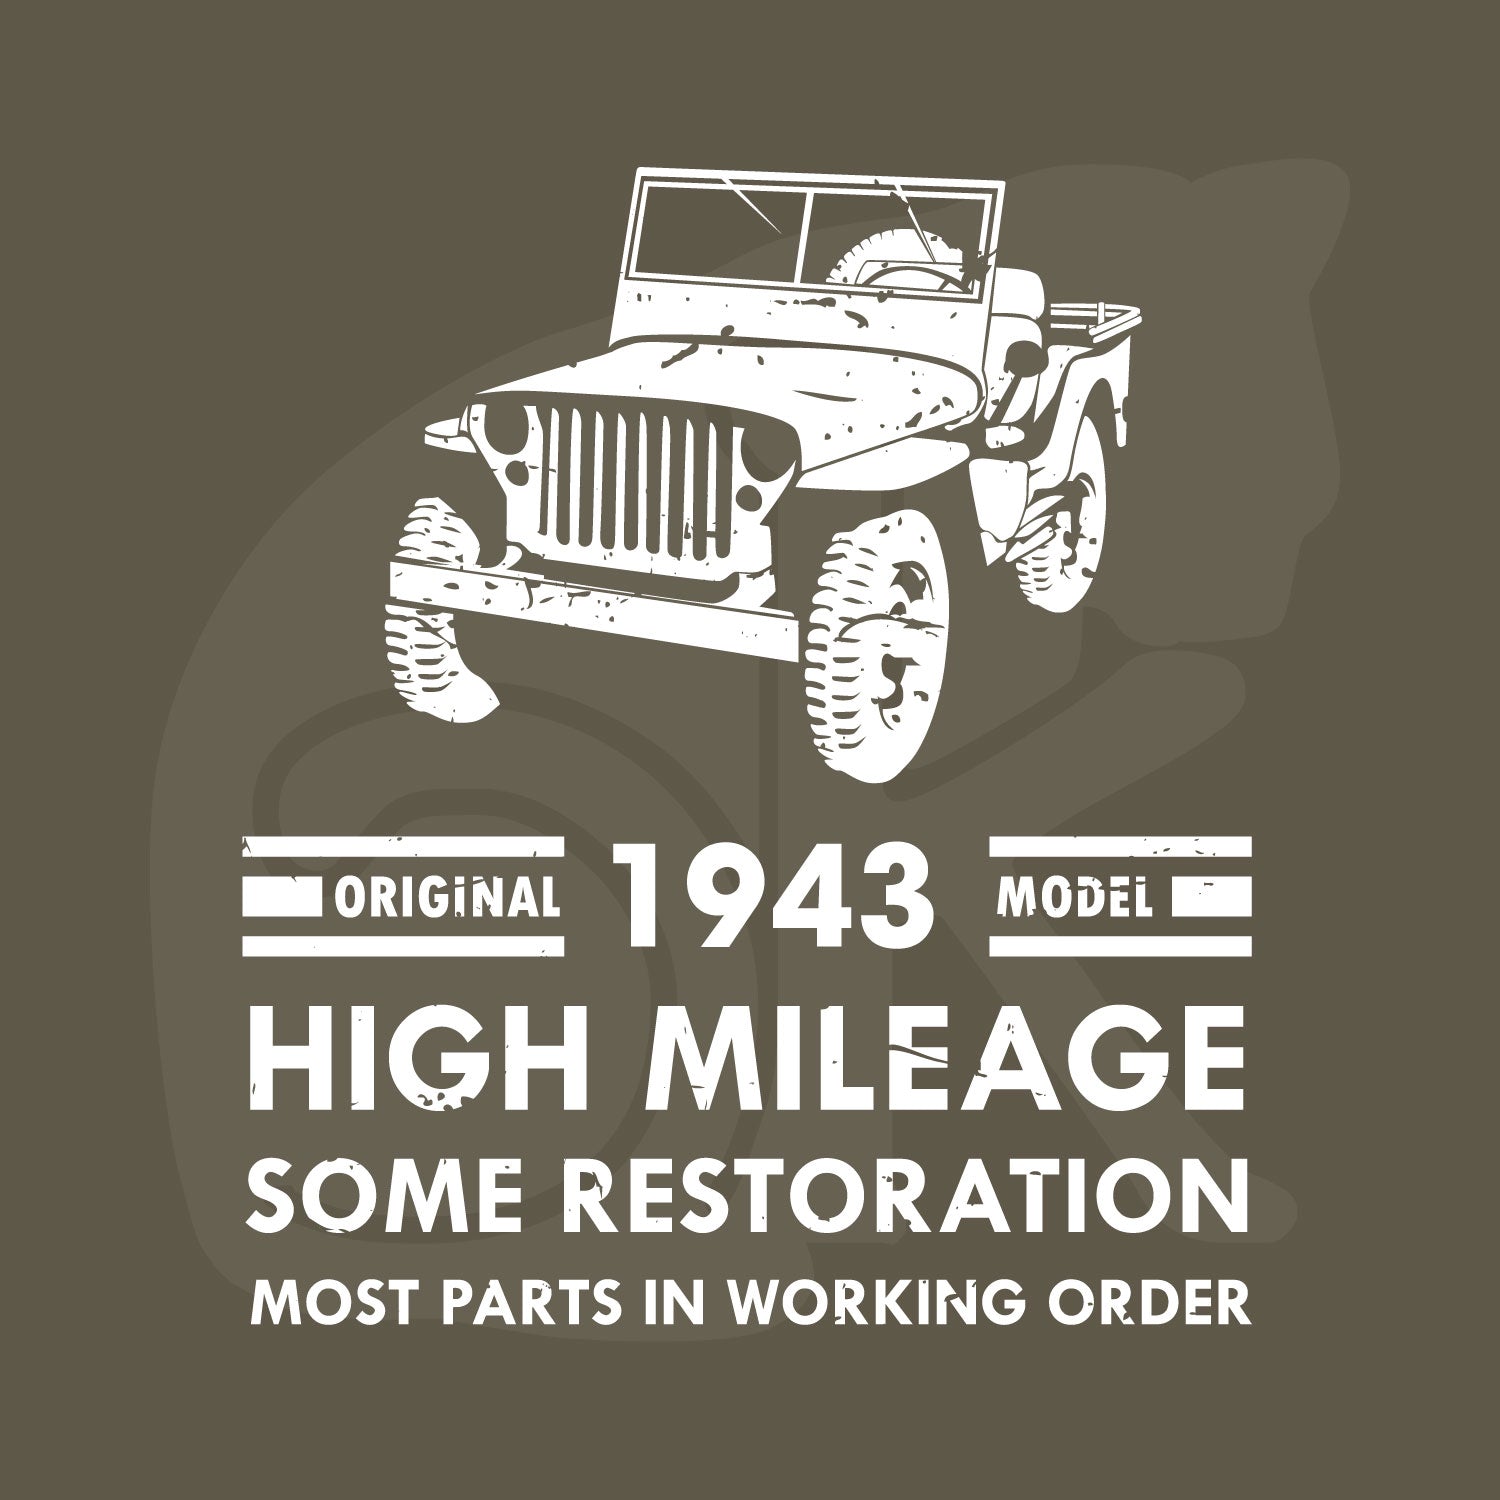 Standalone watermarked distressed graphic of old military jeep and text "Original YEAR model HIGH MILEAGE some restoration MOST PARTS IN WORKING ORDER"